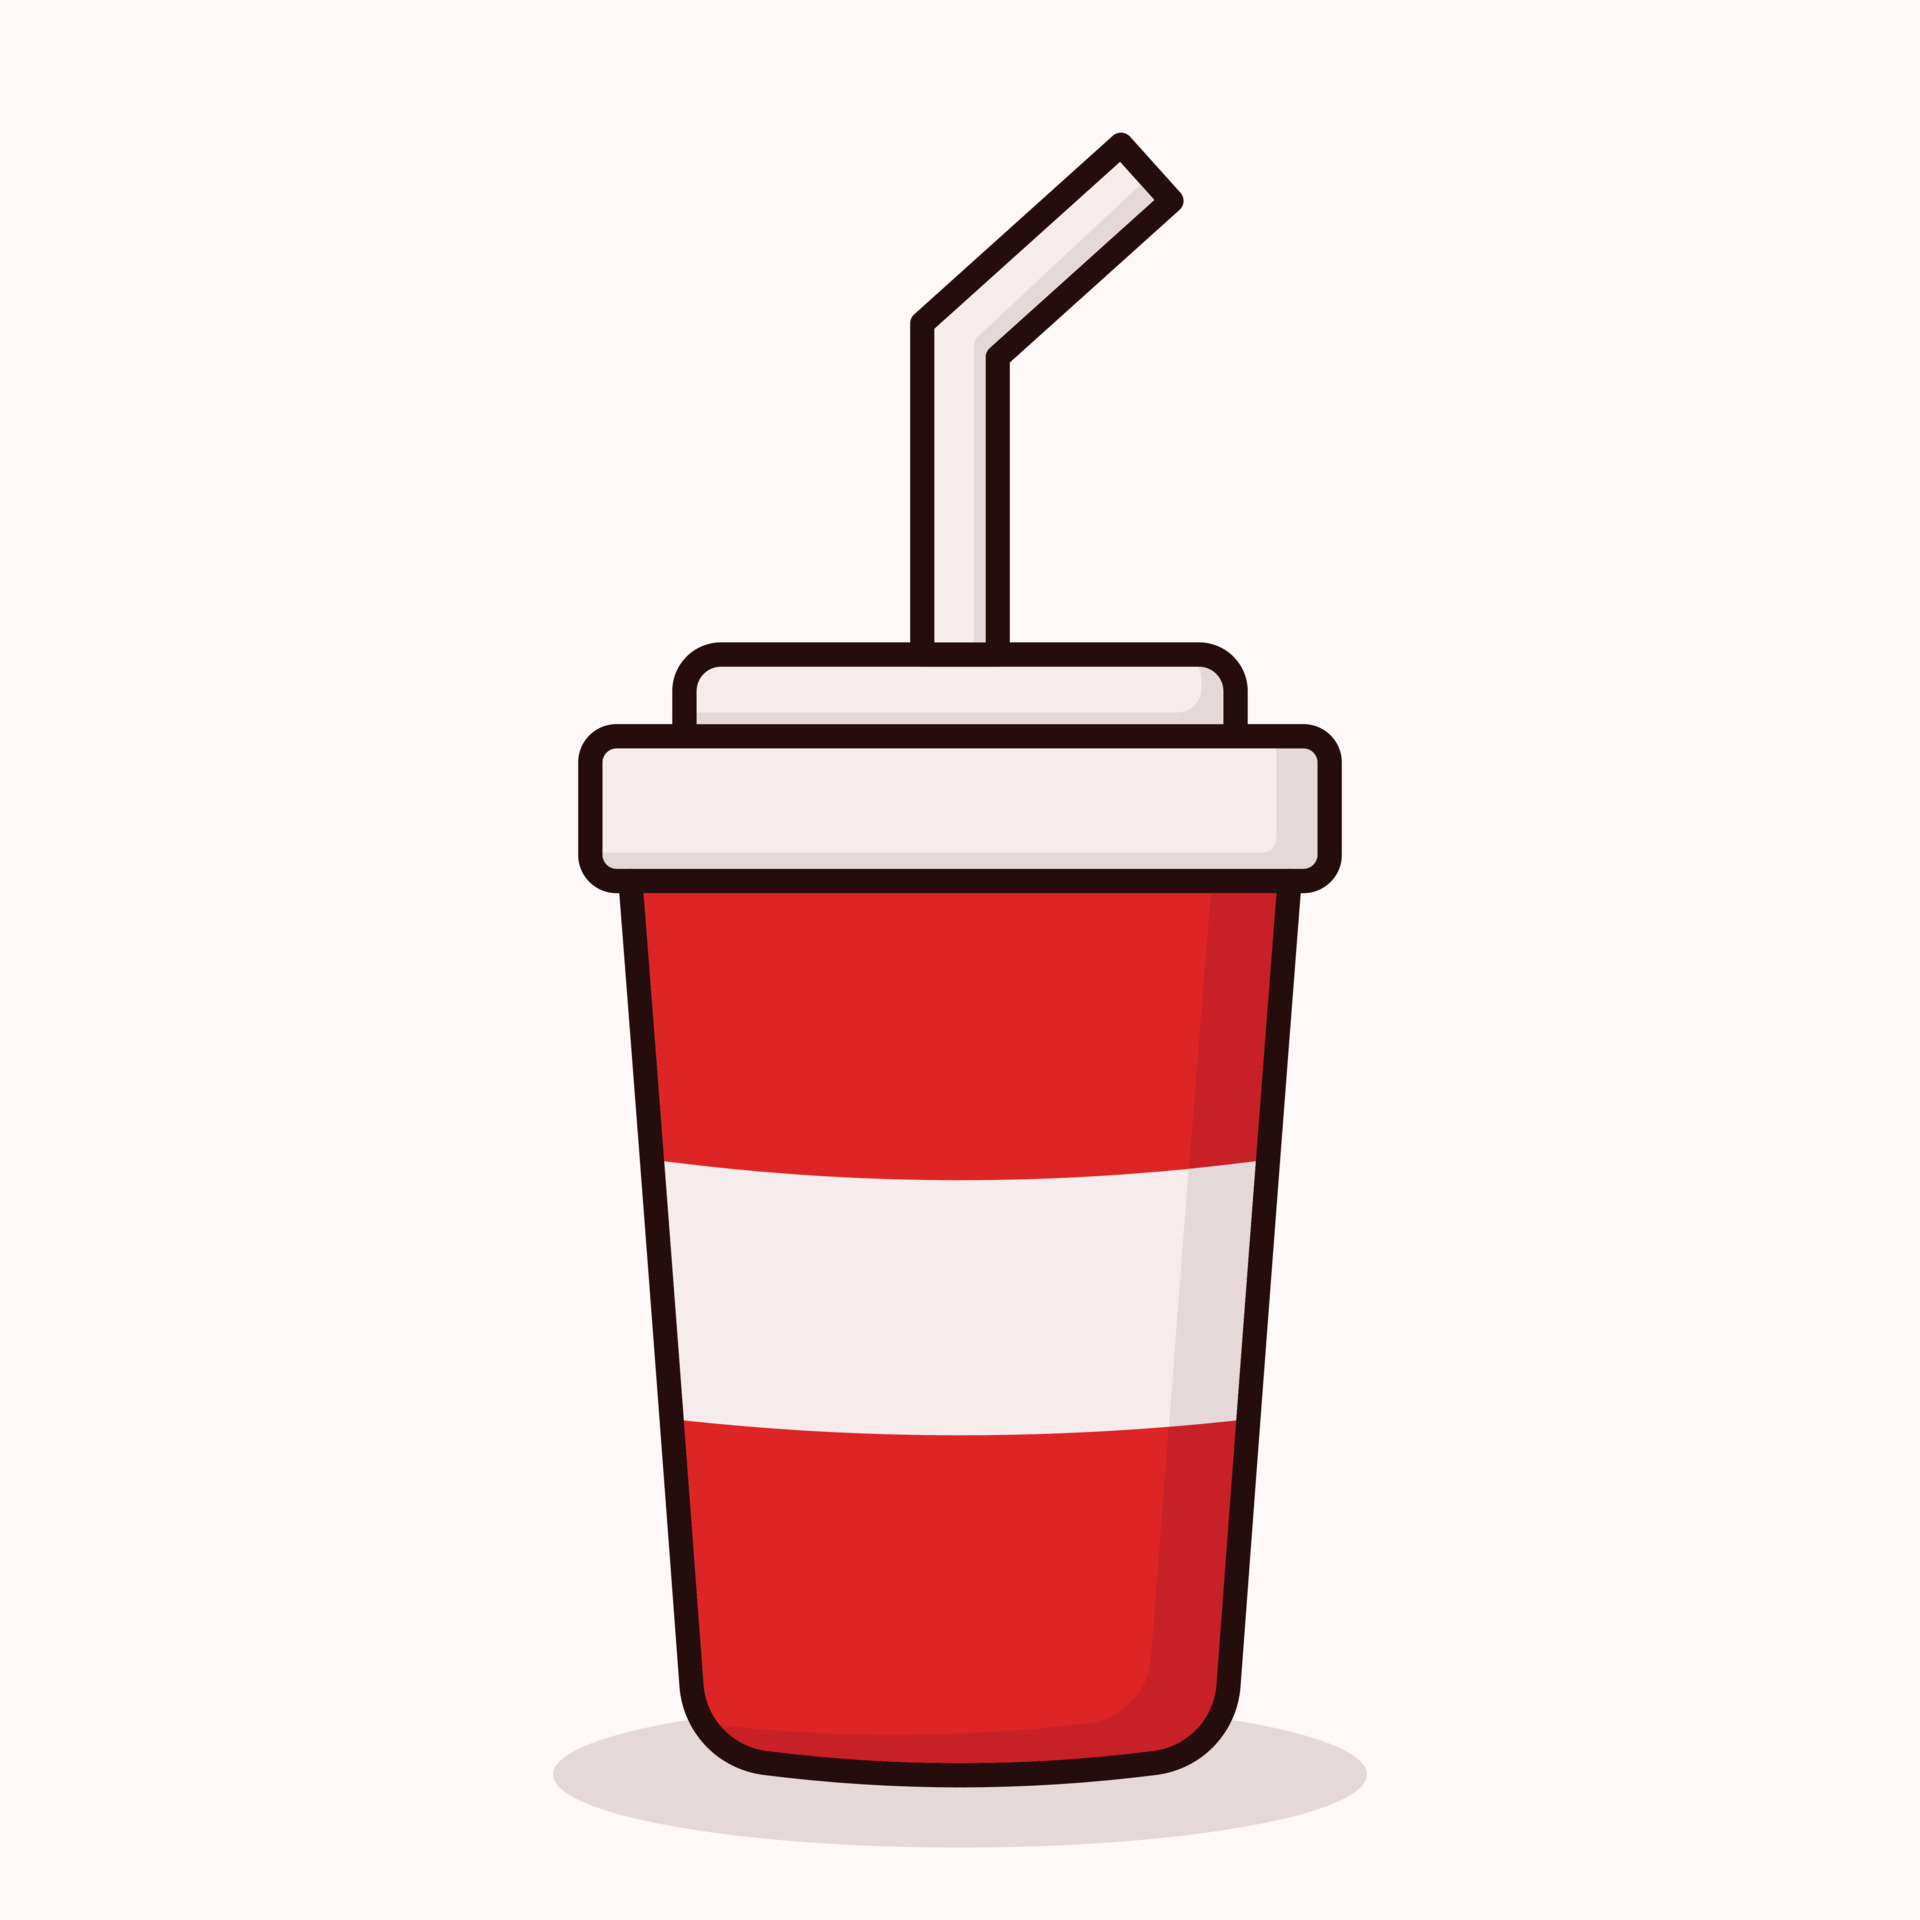 https://static.vecteezy.com/system/resources/previews/021/620/253/original/soda-paper-cup-cartoon-icon-disposable-paper-cup-with-soda-and-straw-food-icon-concept-illustration-suitable-for-icon-logo-sticker-clipart-free-vector.jpg